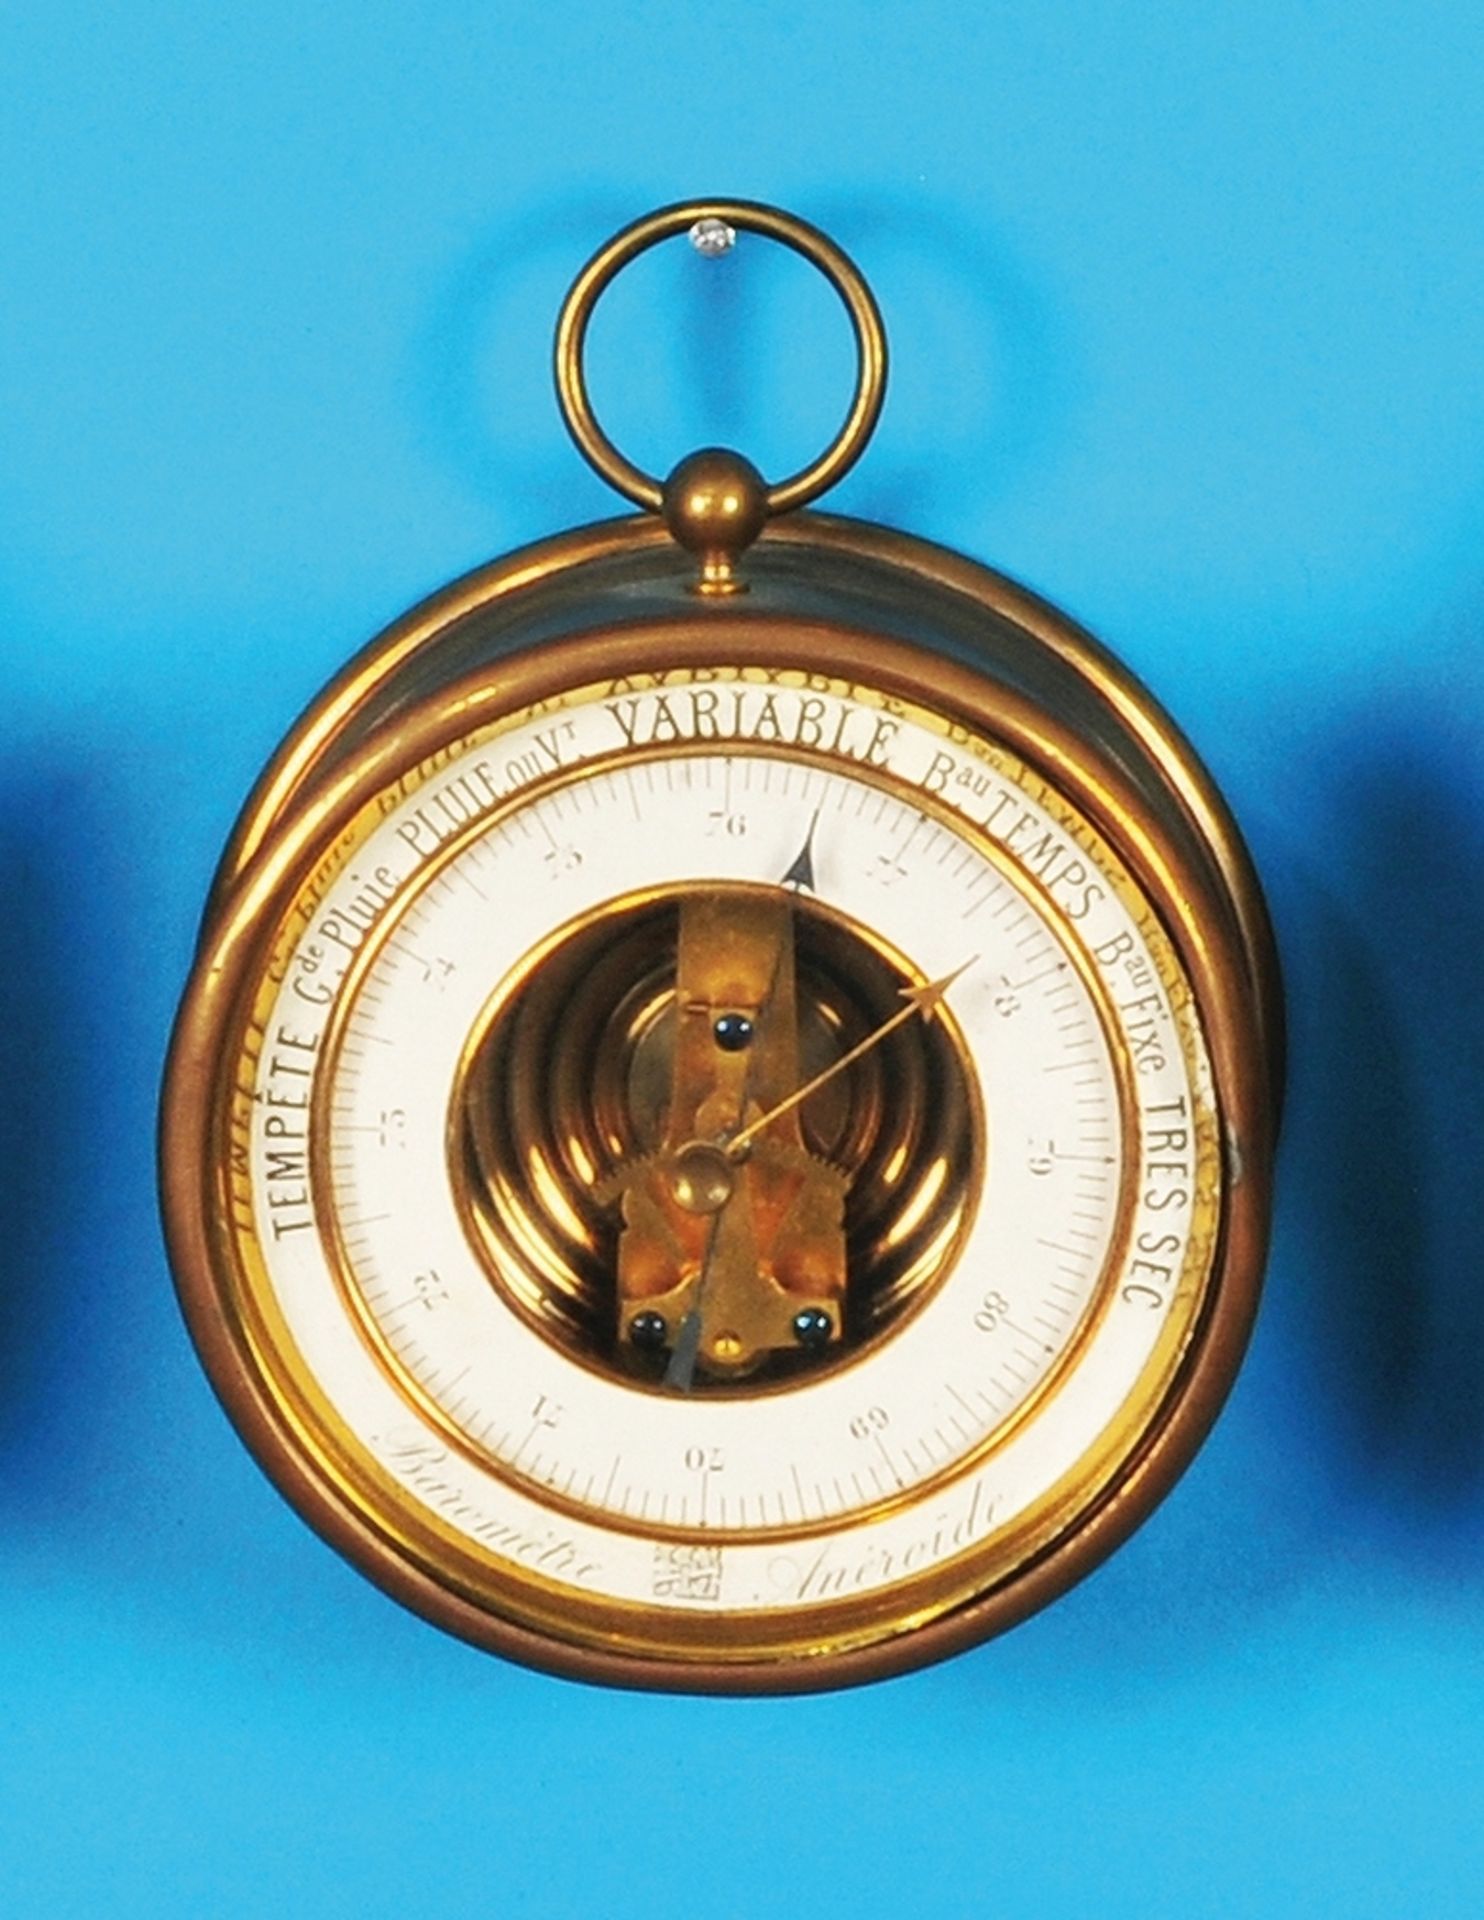 French small round aneroid barometer, round brass case with small feet for standing and carrying bra